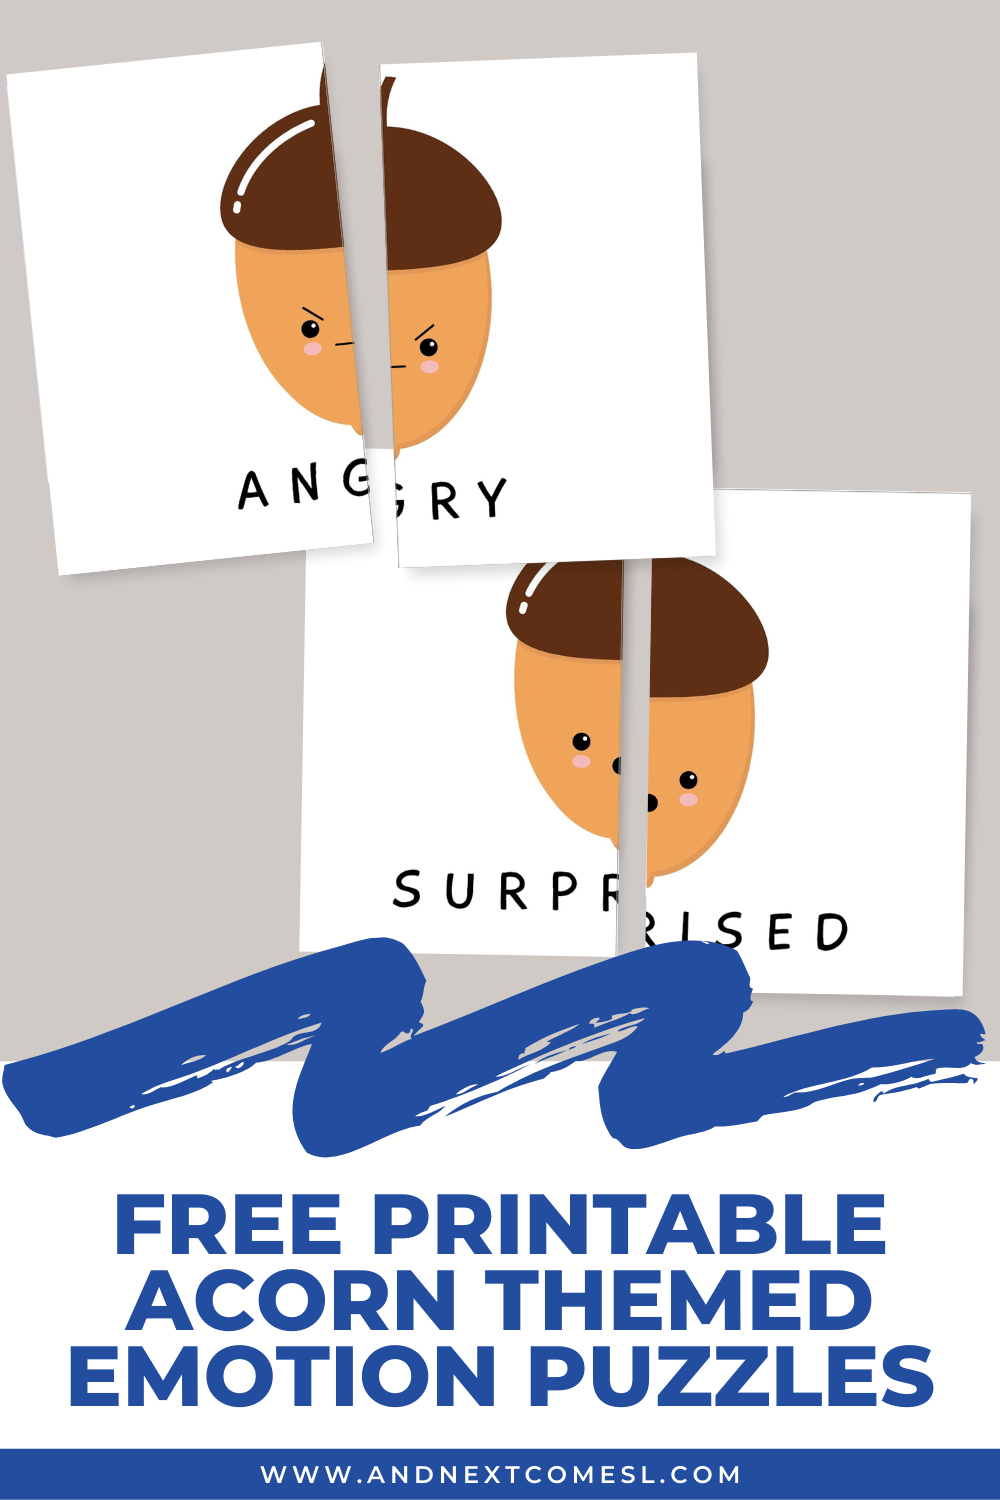 Free printable emotion puzzles with acorn emoji faces - great for toddlers, preschool, and kids of all ages!